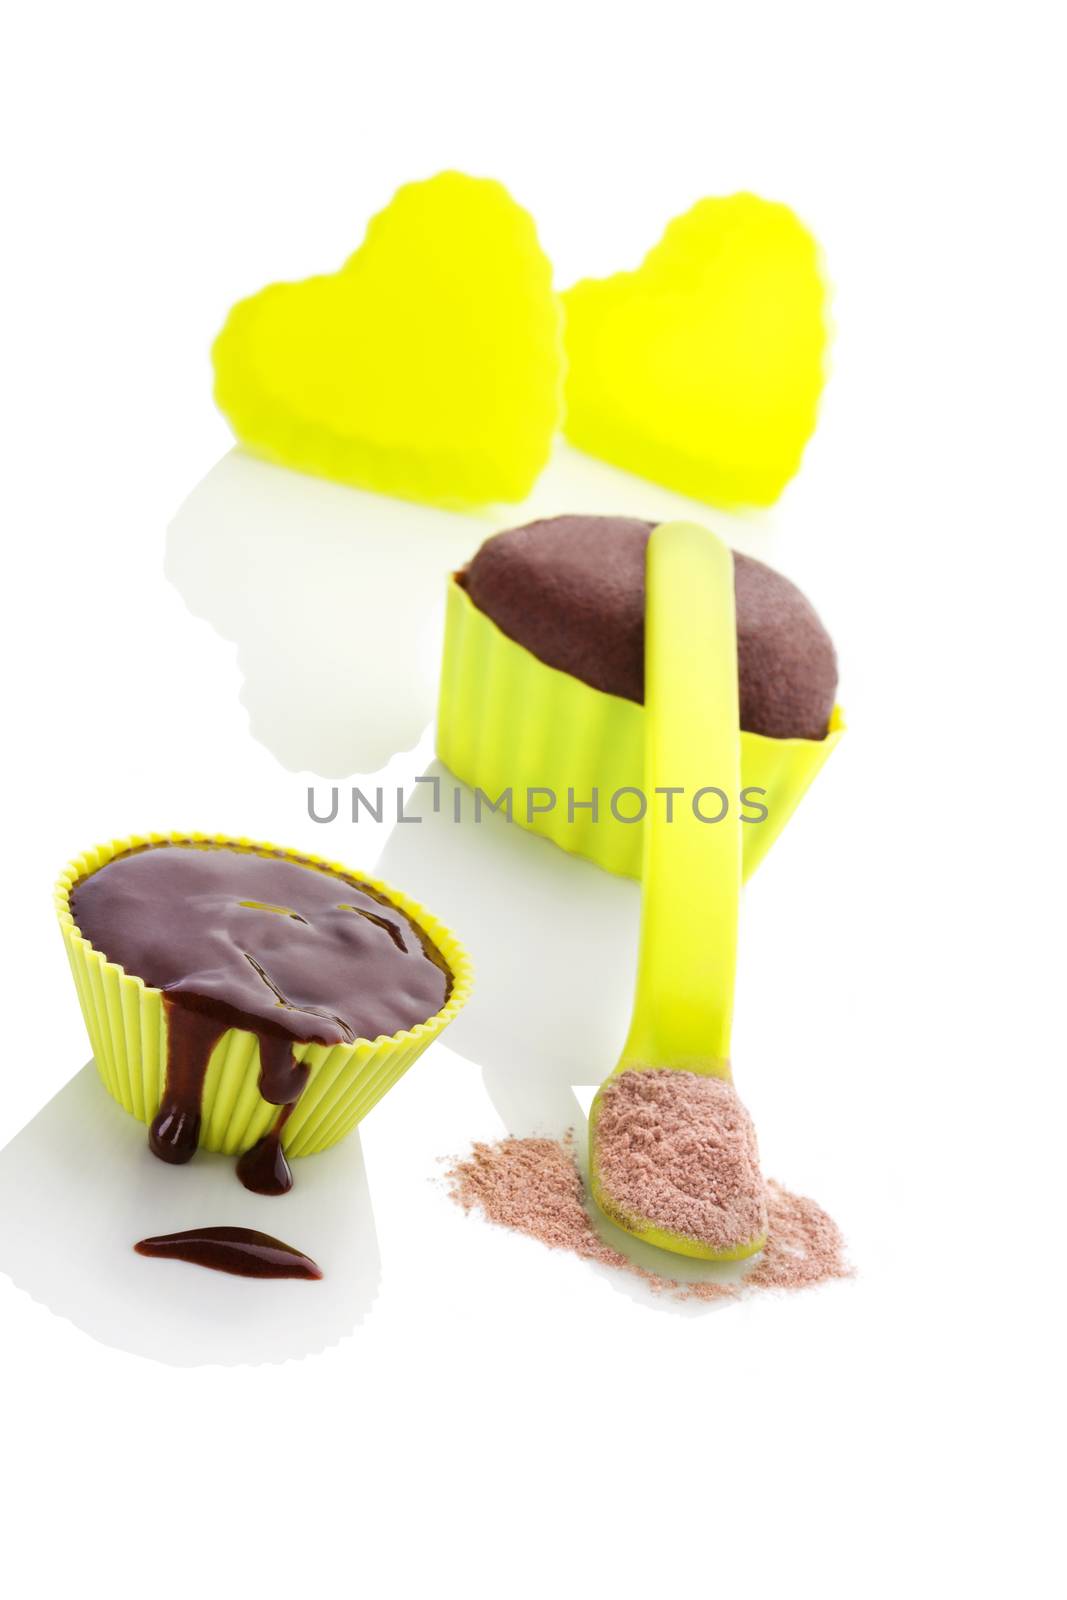 Cupcake chocolate mixture in neon green colored baking forms isolated on white background. Culinary cupcakes baking.